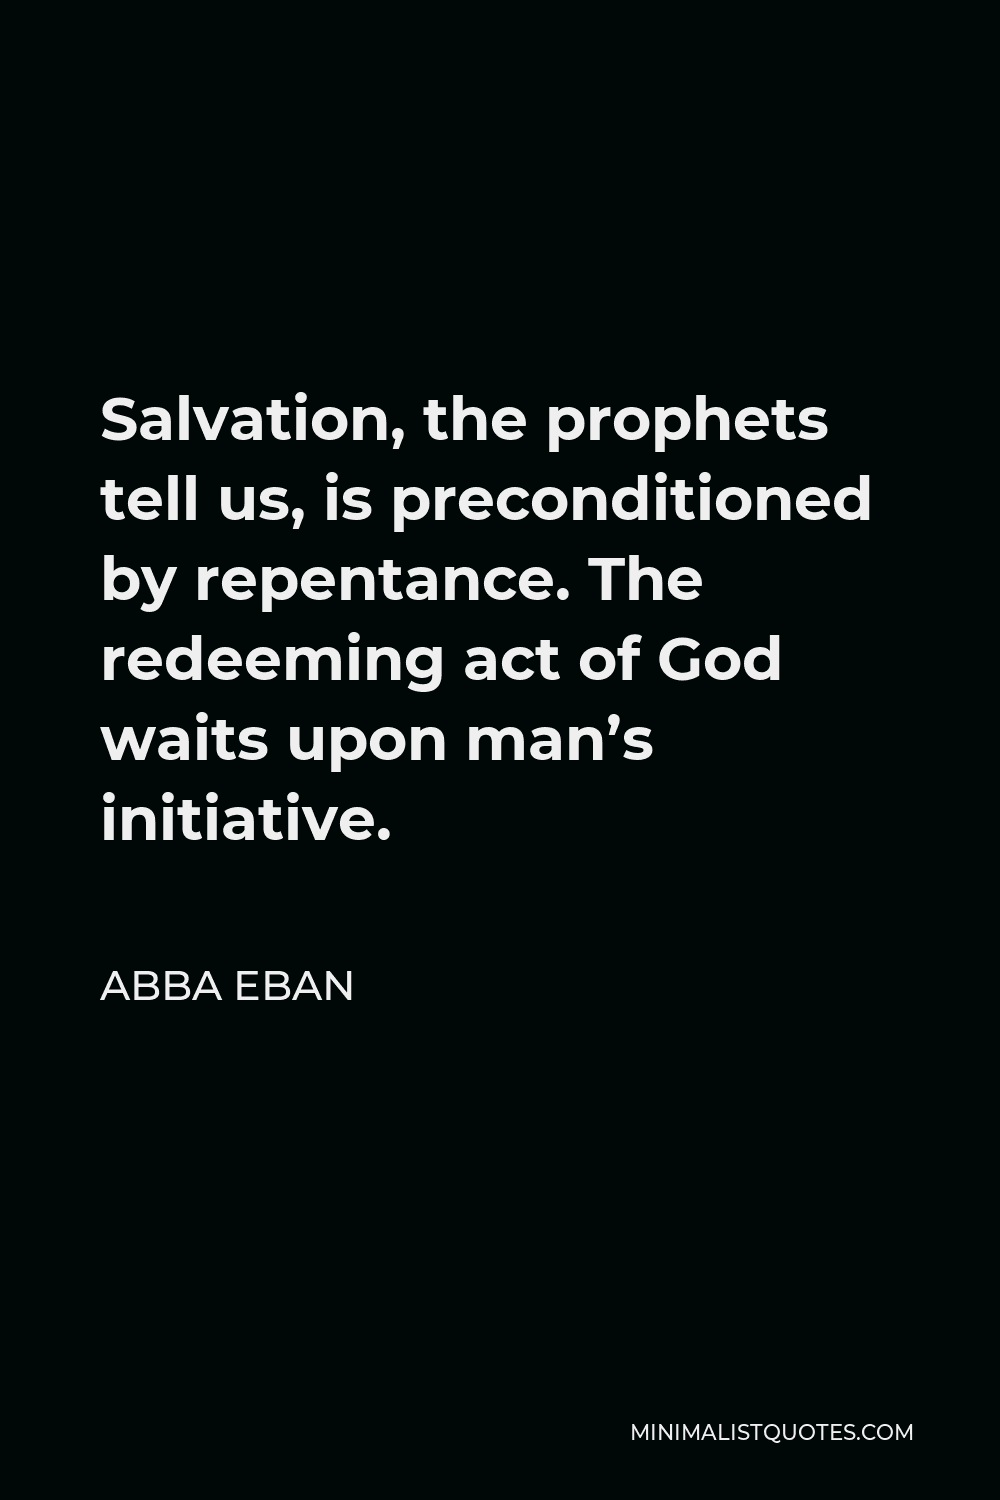 Abba Eban Quote - Salvation, the prophets tell us, is preconditioned by repentance. The redeeming act of God waits upon man’s initiative.